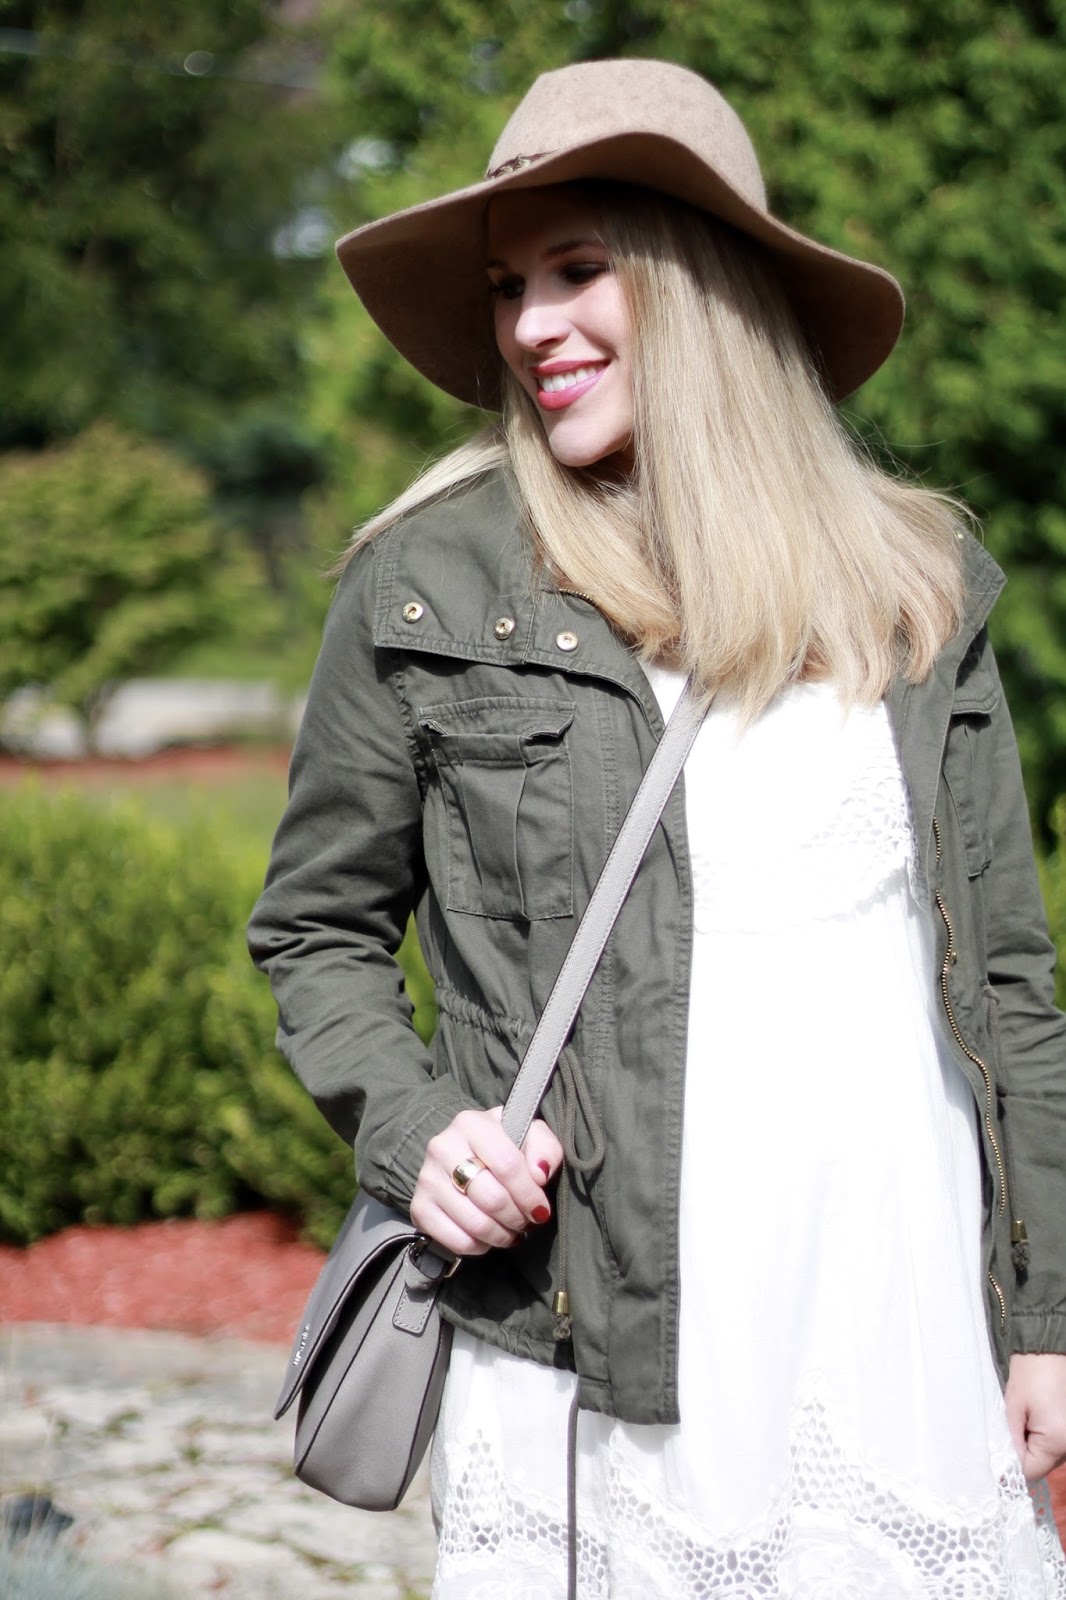 Wearing a White Dress for Fall & Confident Twosday Linkup - I do deClaire